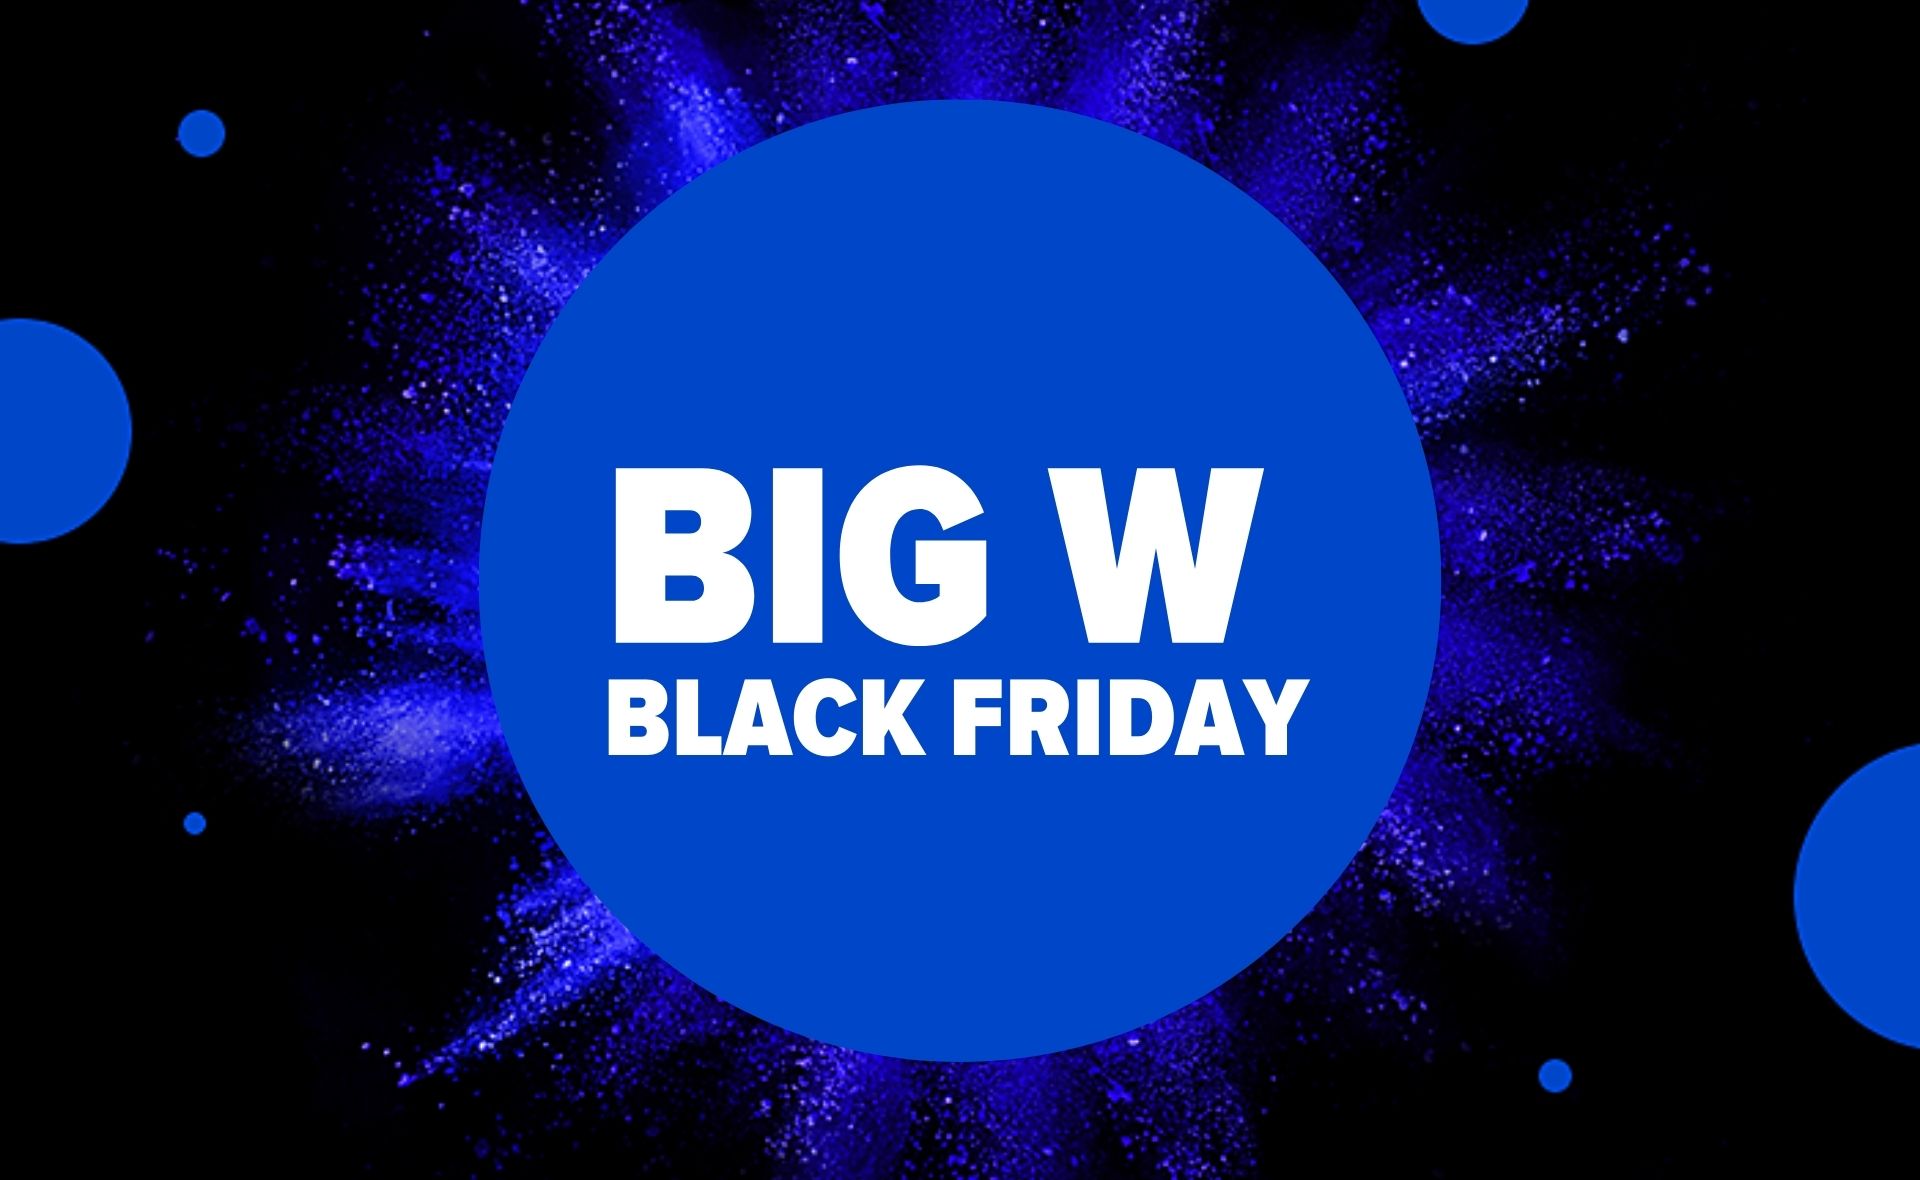 Here’s what you guys need to get from Big W on Black Friday